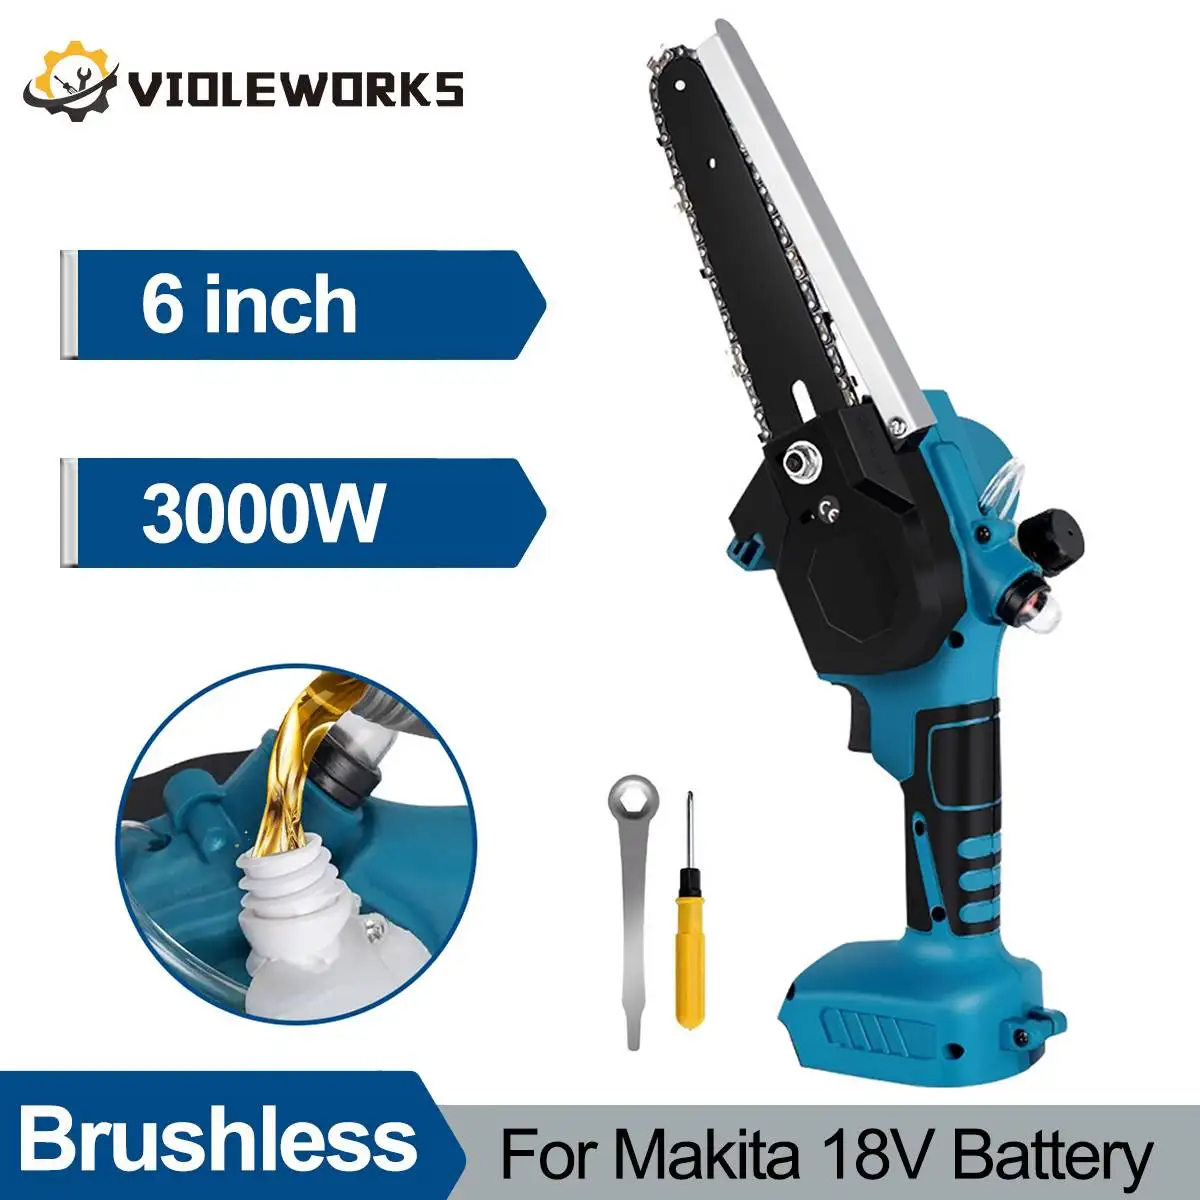 

3000W 6inch Cordless Electric Chain Saw Brushless Motor Protable Handheld Chainsaw Tree Branches Wood Cutter for Makita 18V